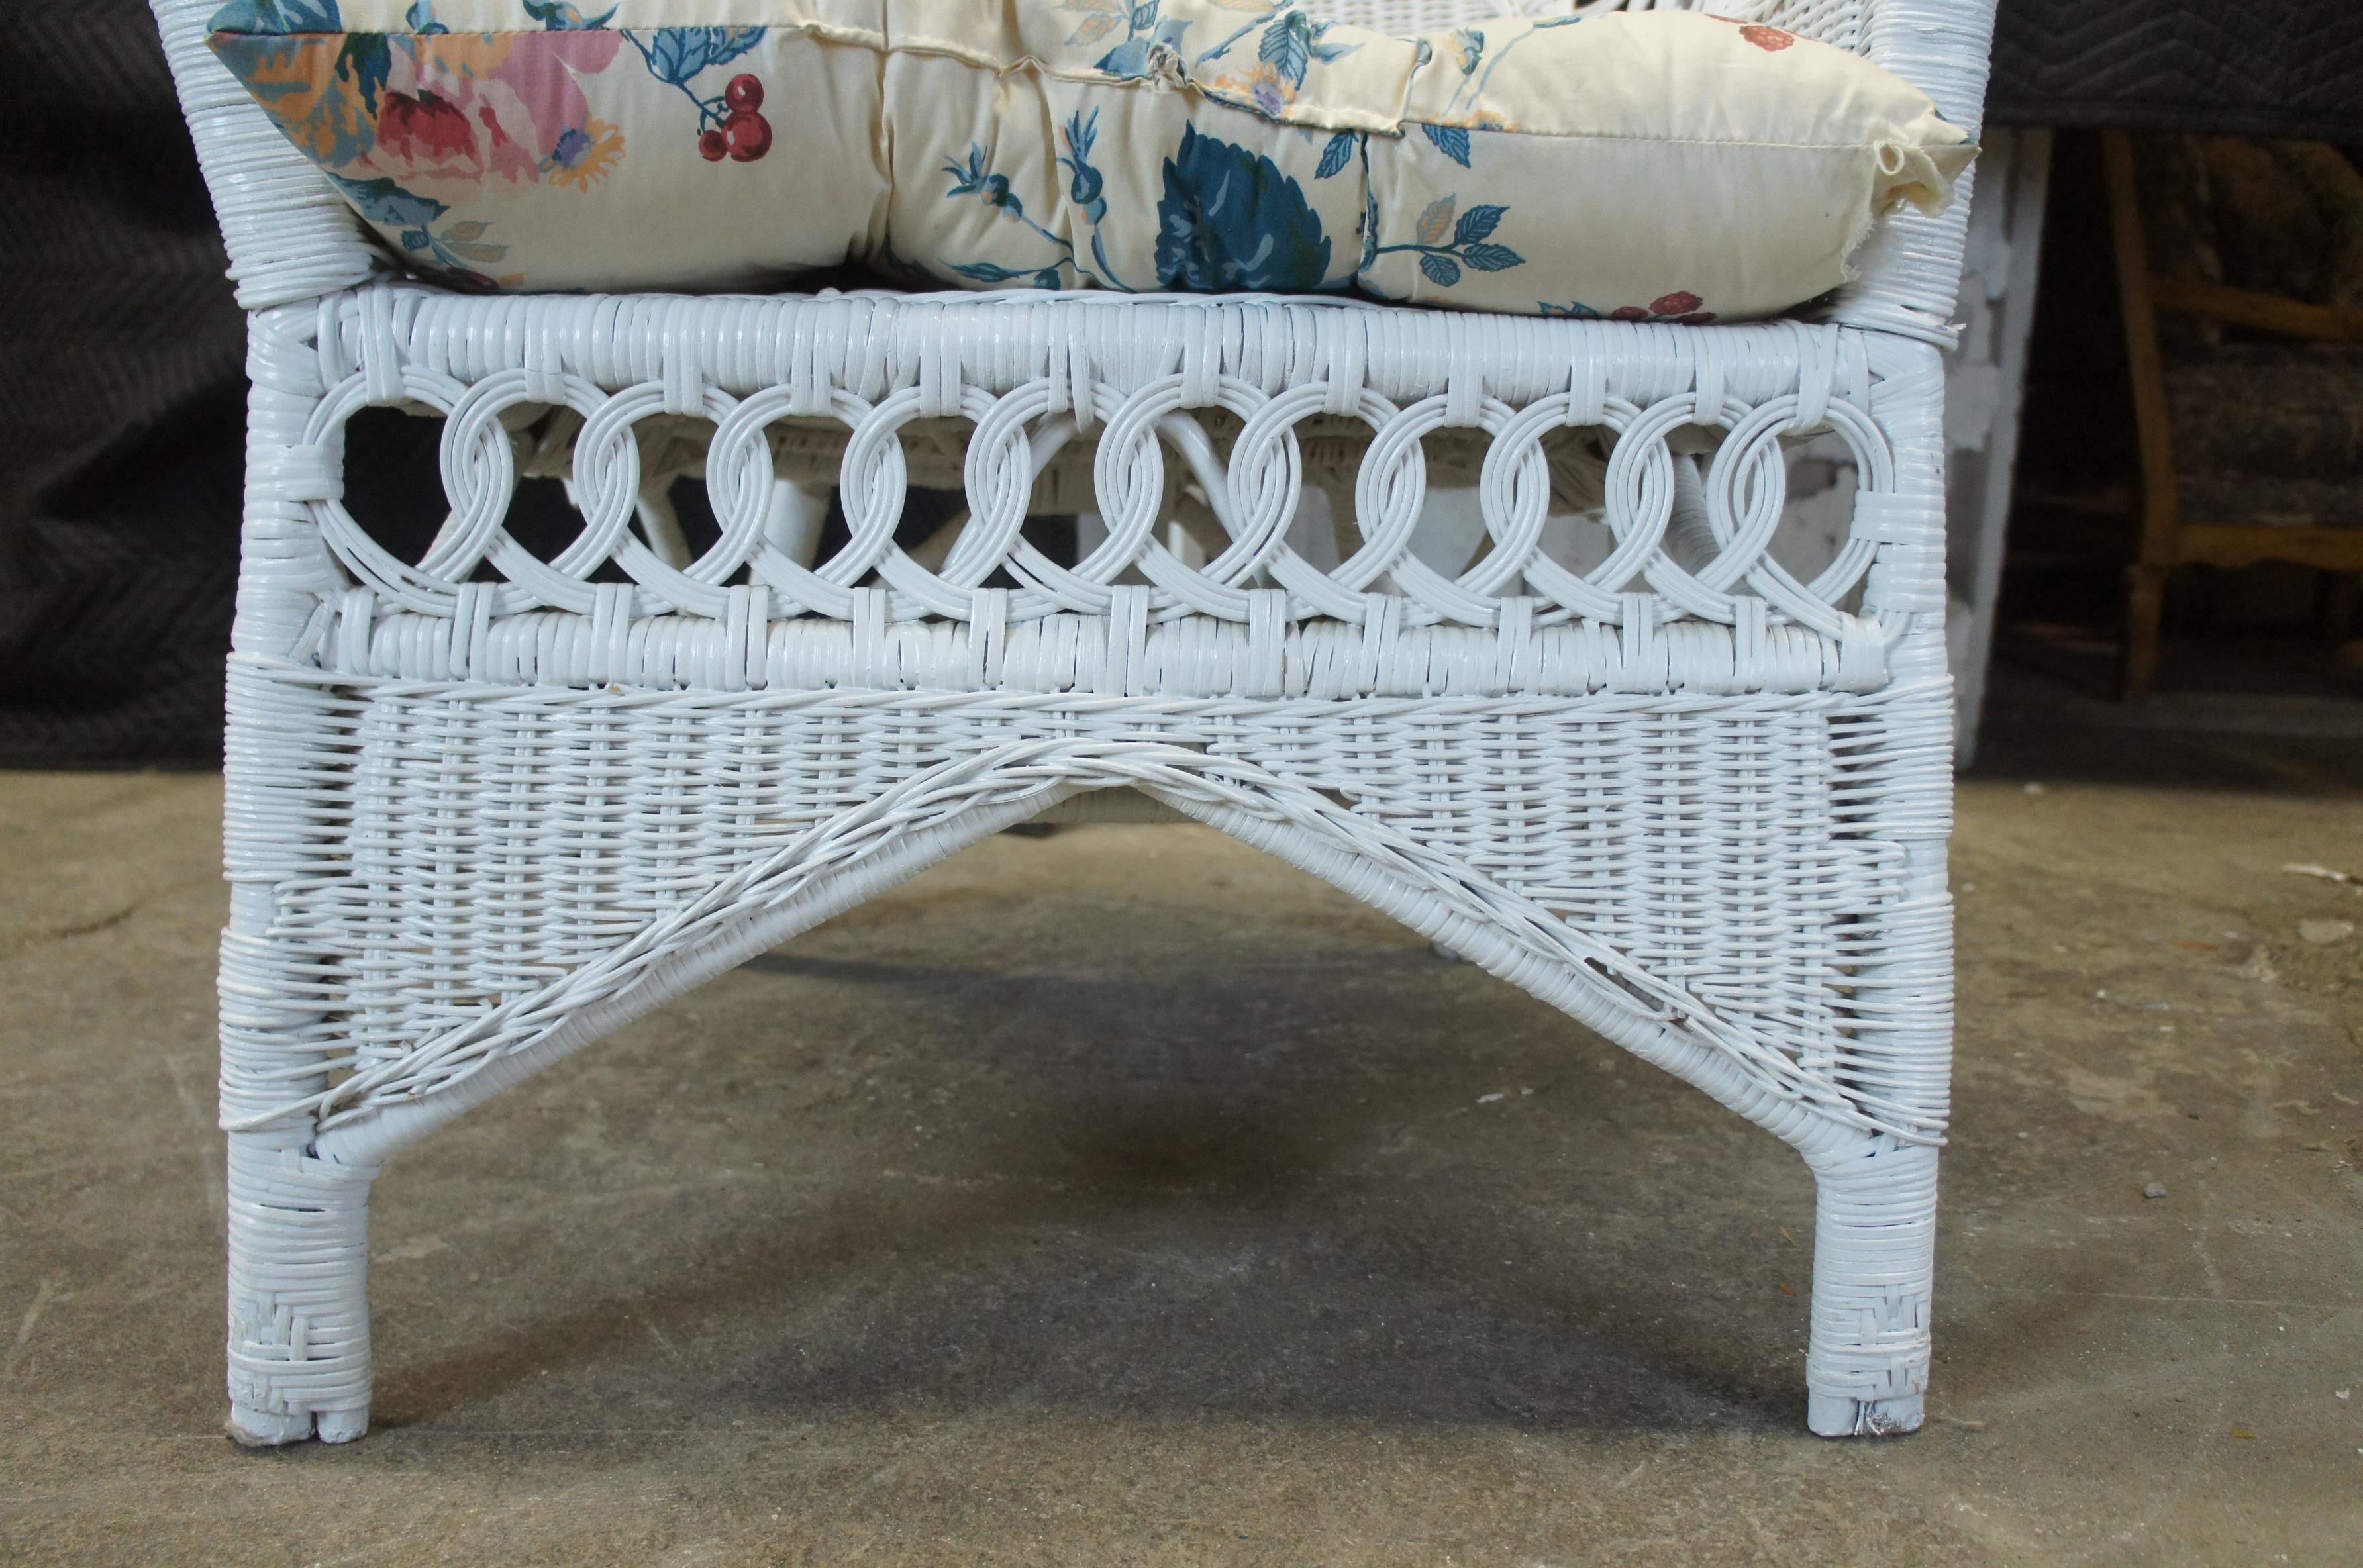 Upholstery 2 Vintage Wicker Bamboo Rattan Rolled Club Arm Chairs White Painted Boho Chic